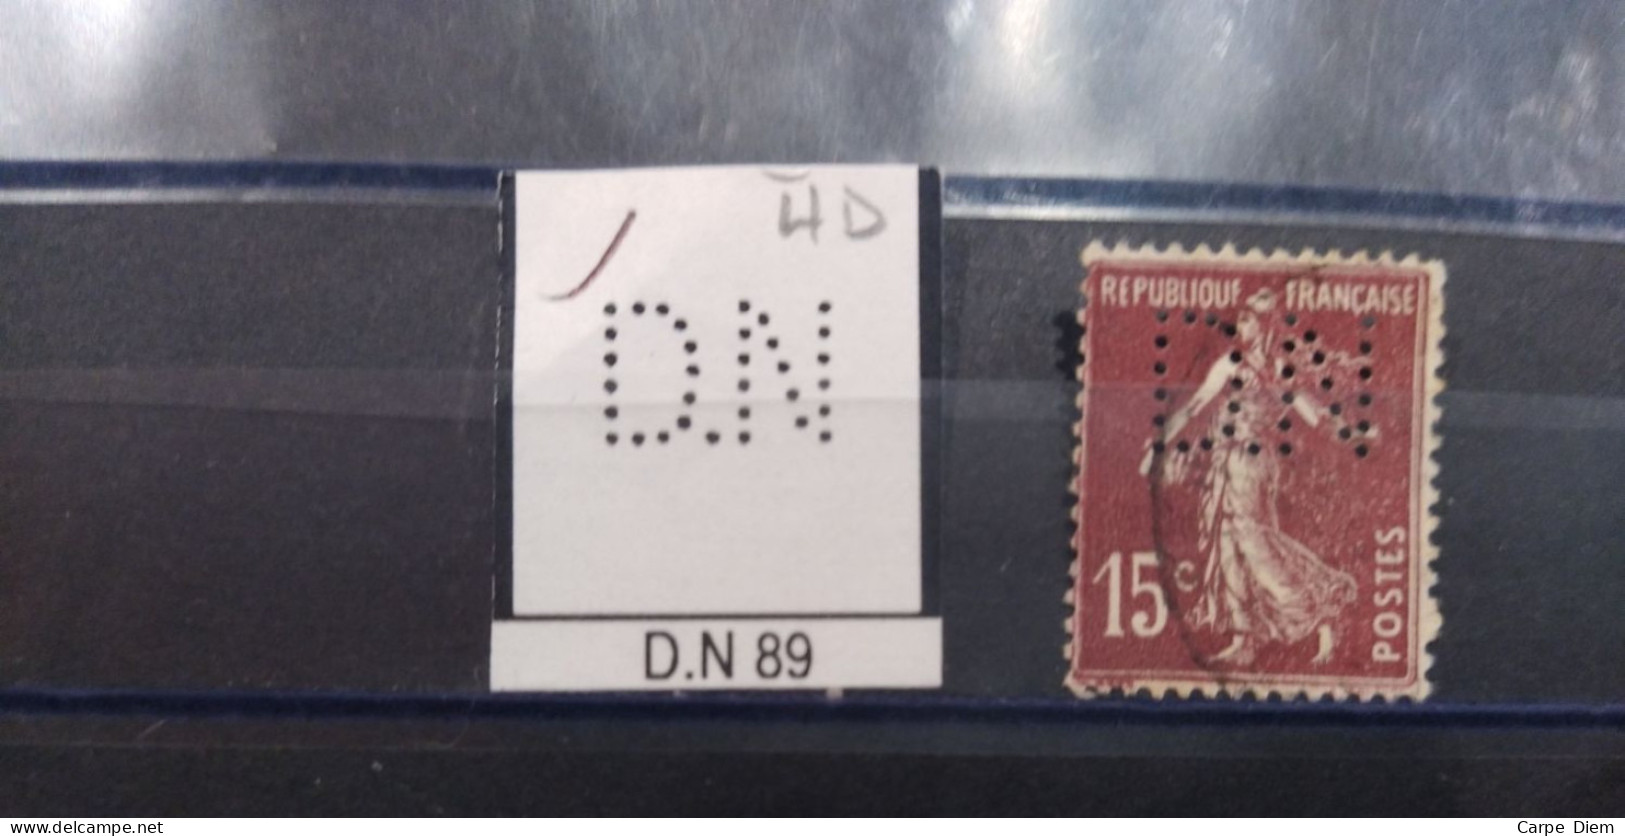 FRANCE D.N 89 TIMBRE DN 89 INDICE 4 SUR 189 PERFORE PERFORES PERFIN PERFINS PERFO PERFORATION PERFORIERT - Gebraucht